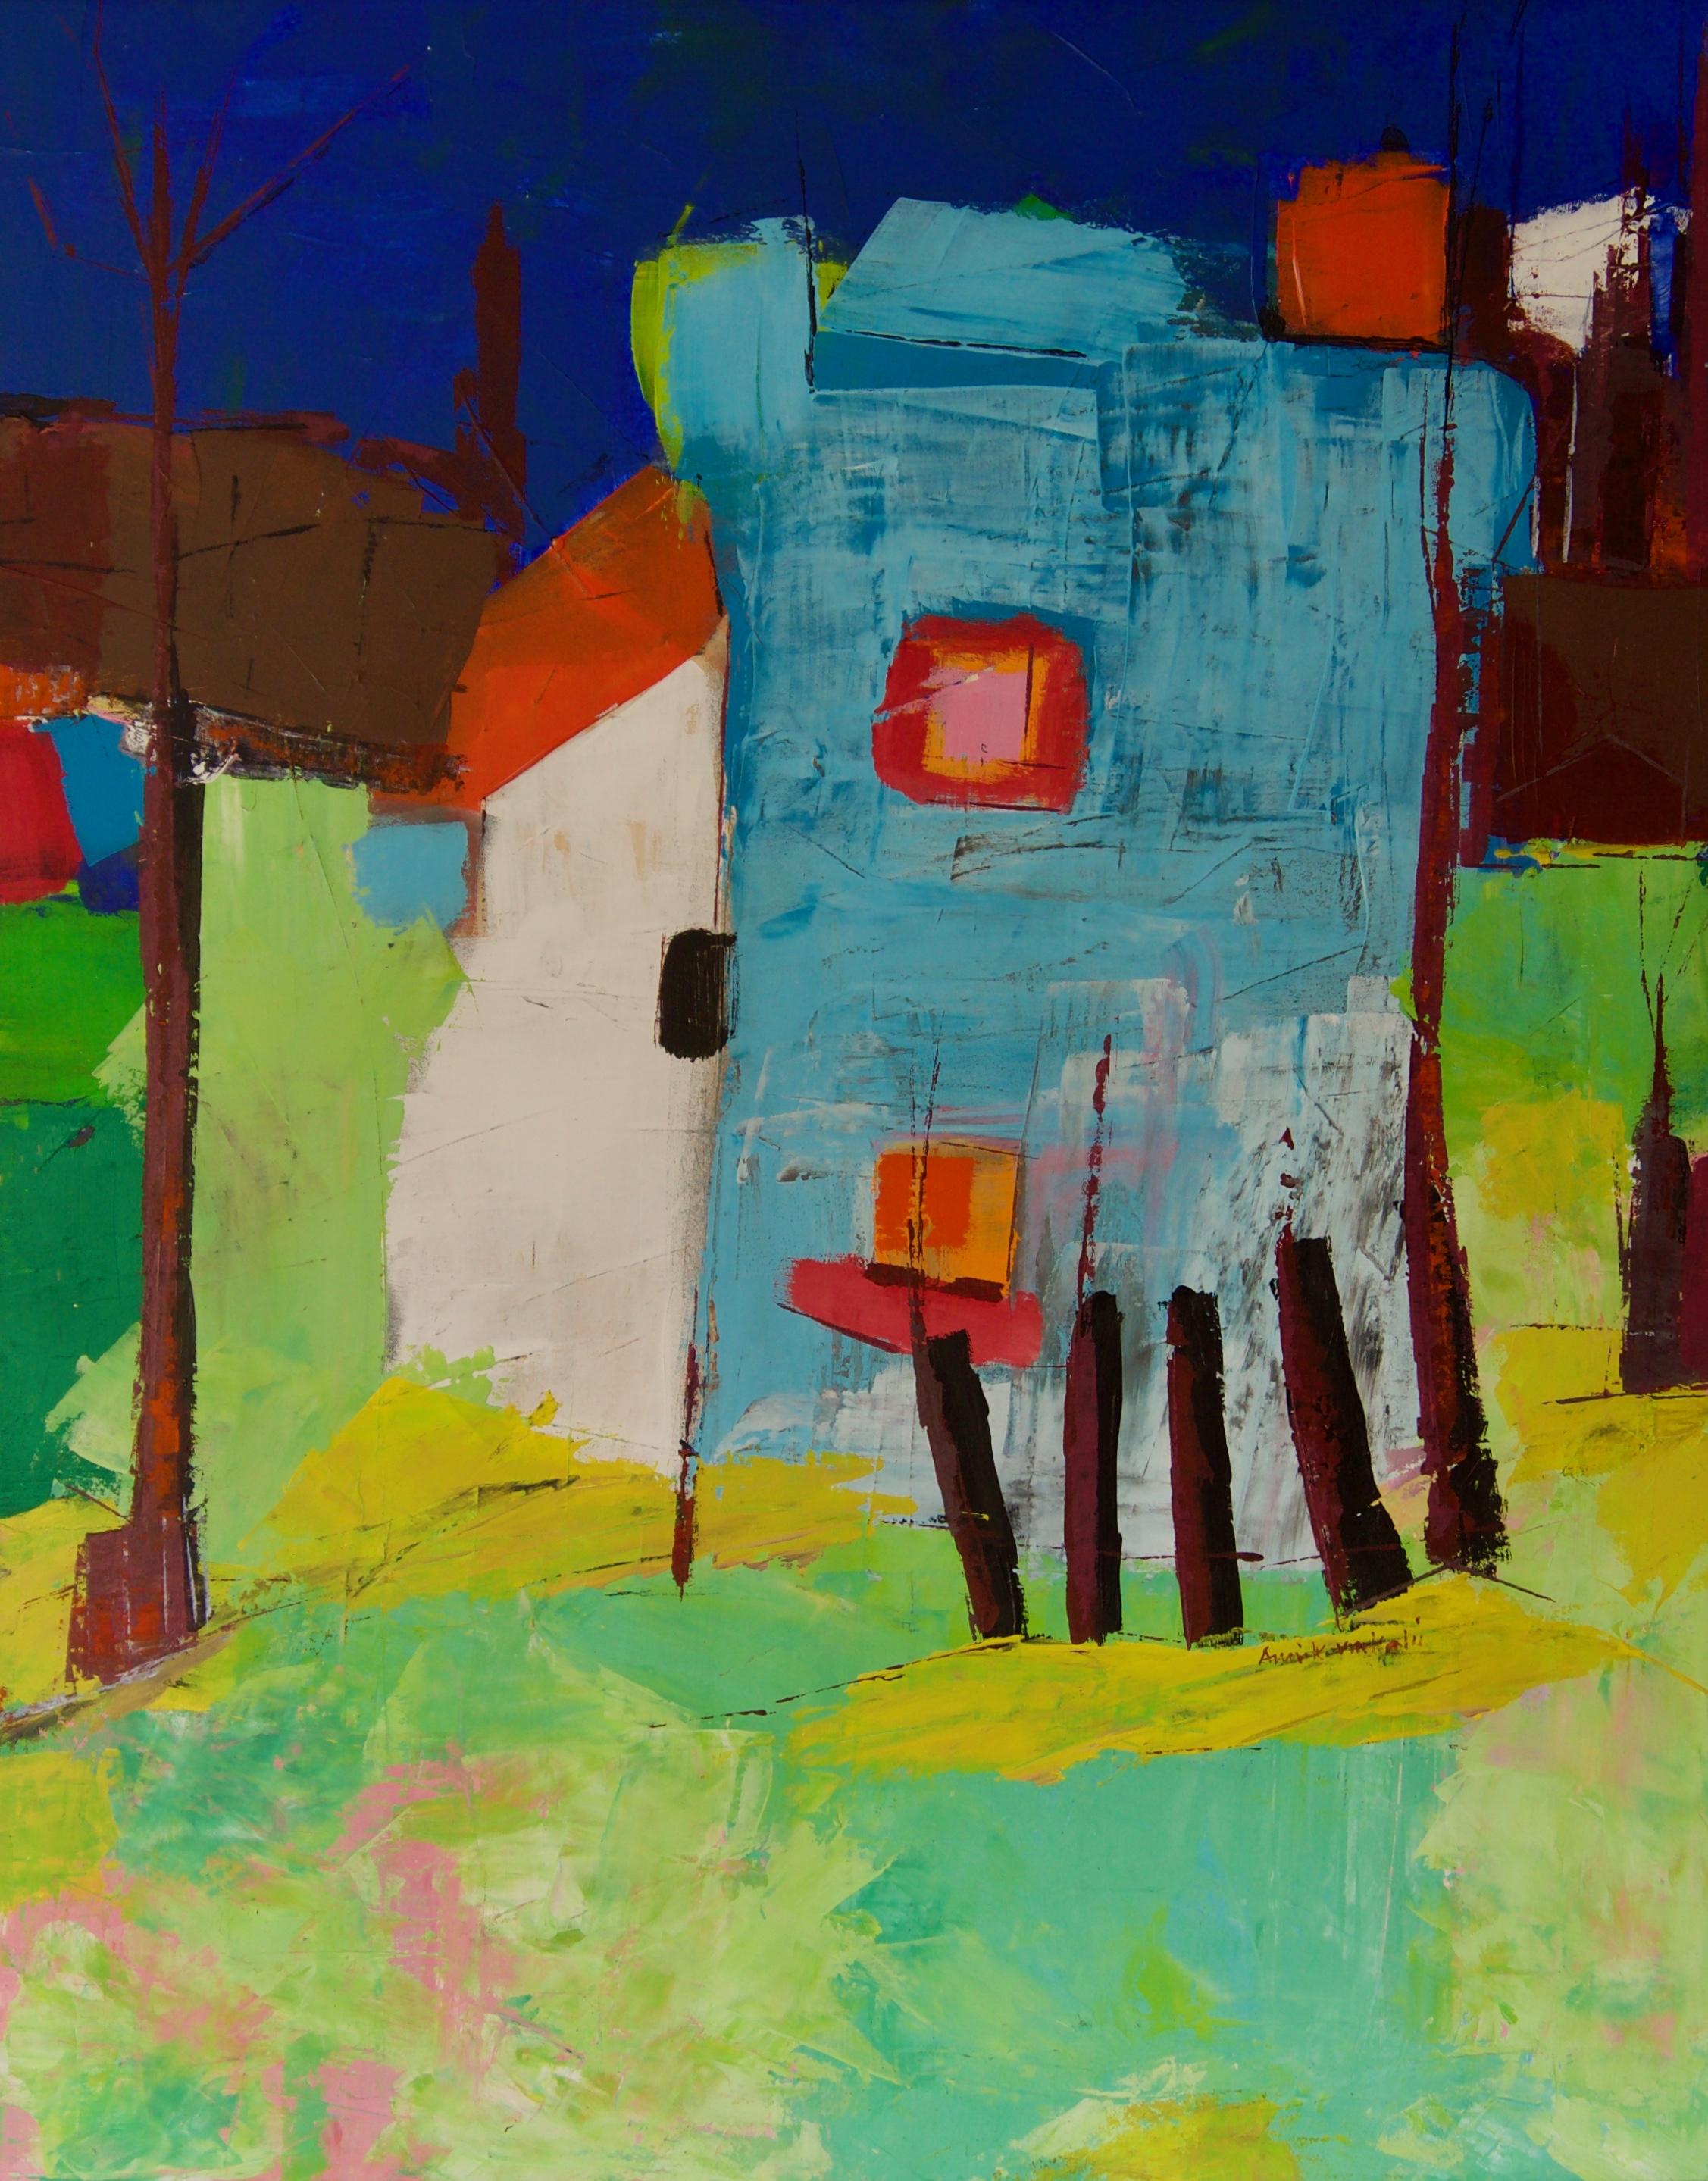 Abstract Building - Late 20th Century Acrylic Painting by Amrik Varkalis

Amrik Varkalis trained at The Manchester School of Art in the 1970's. She employs her complete understanding of colour and form, to create lush abstract landscapes and still